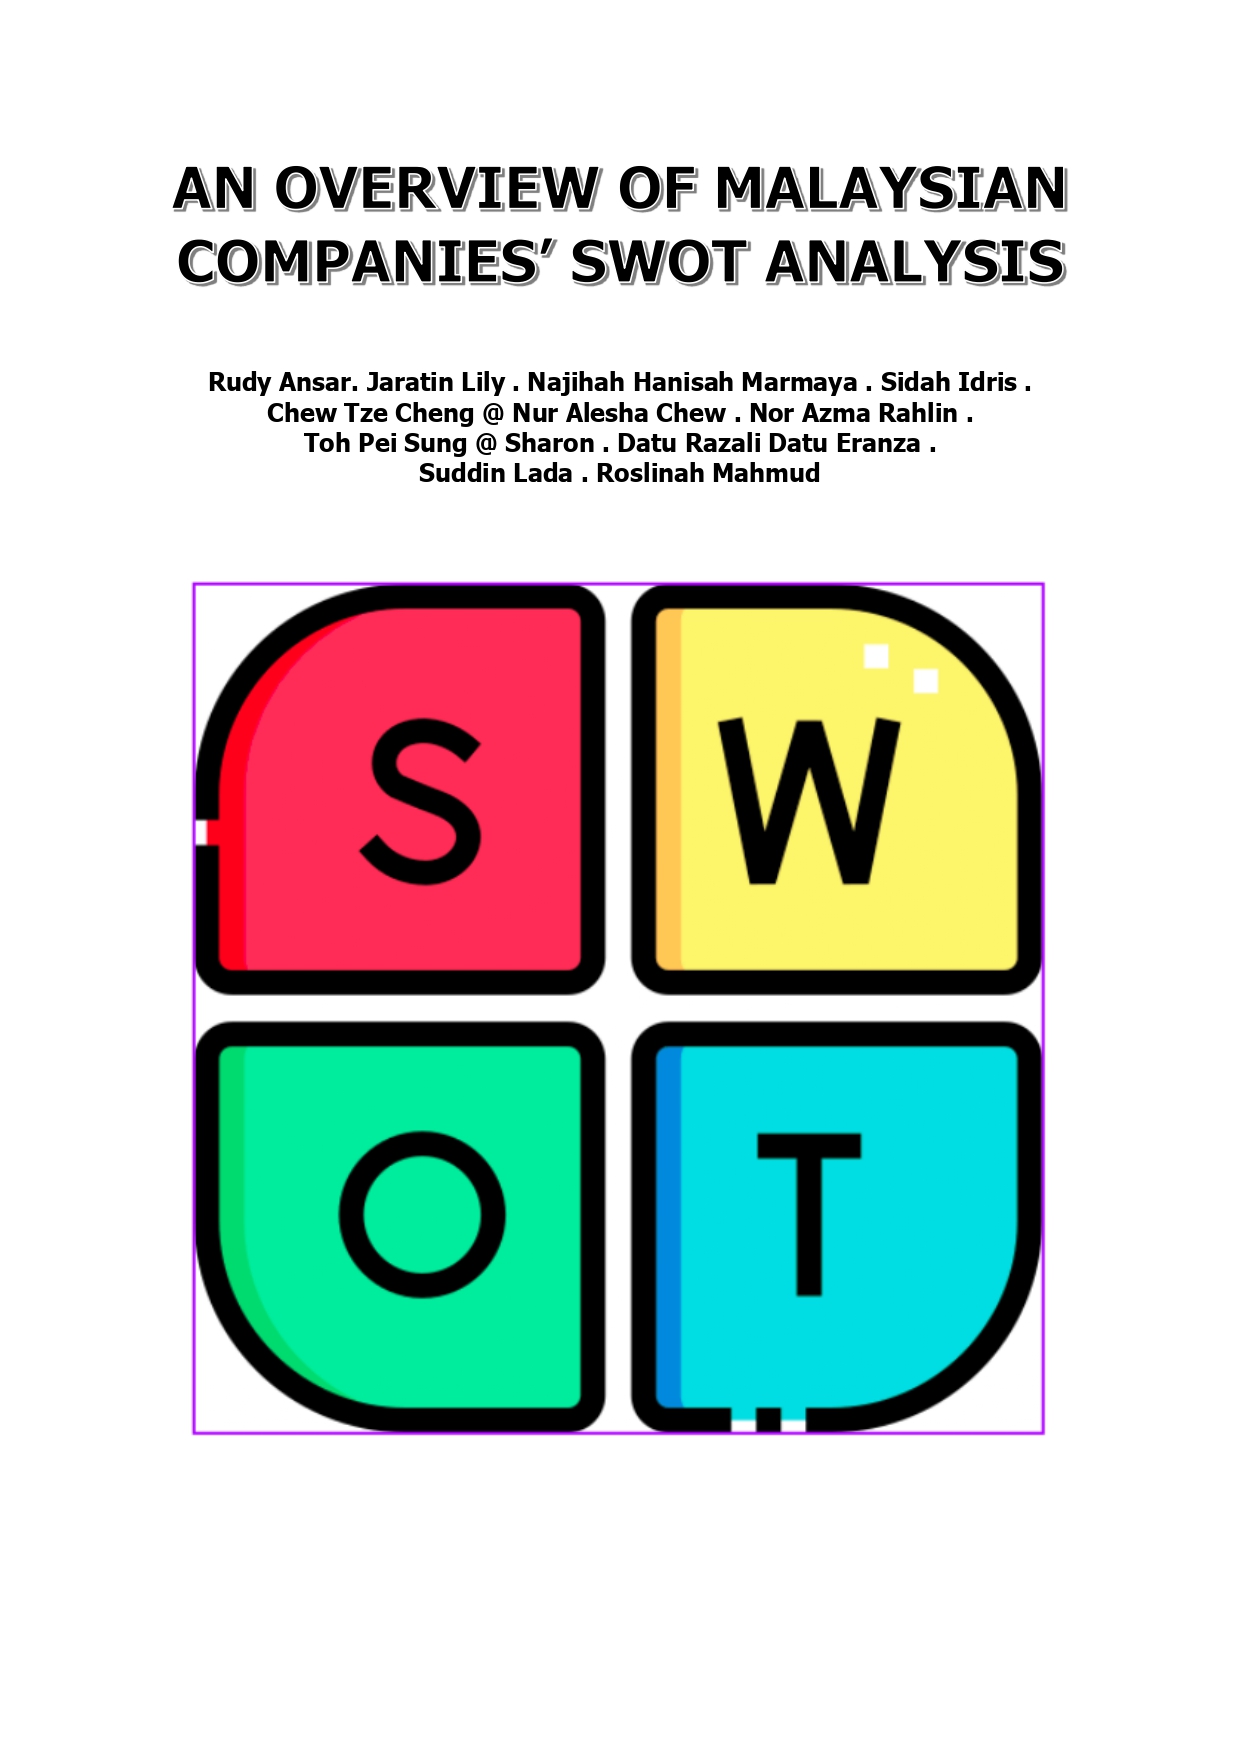 An Overview of Malaysian Companies' SWOT Analysis